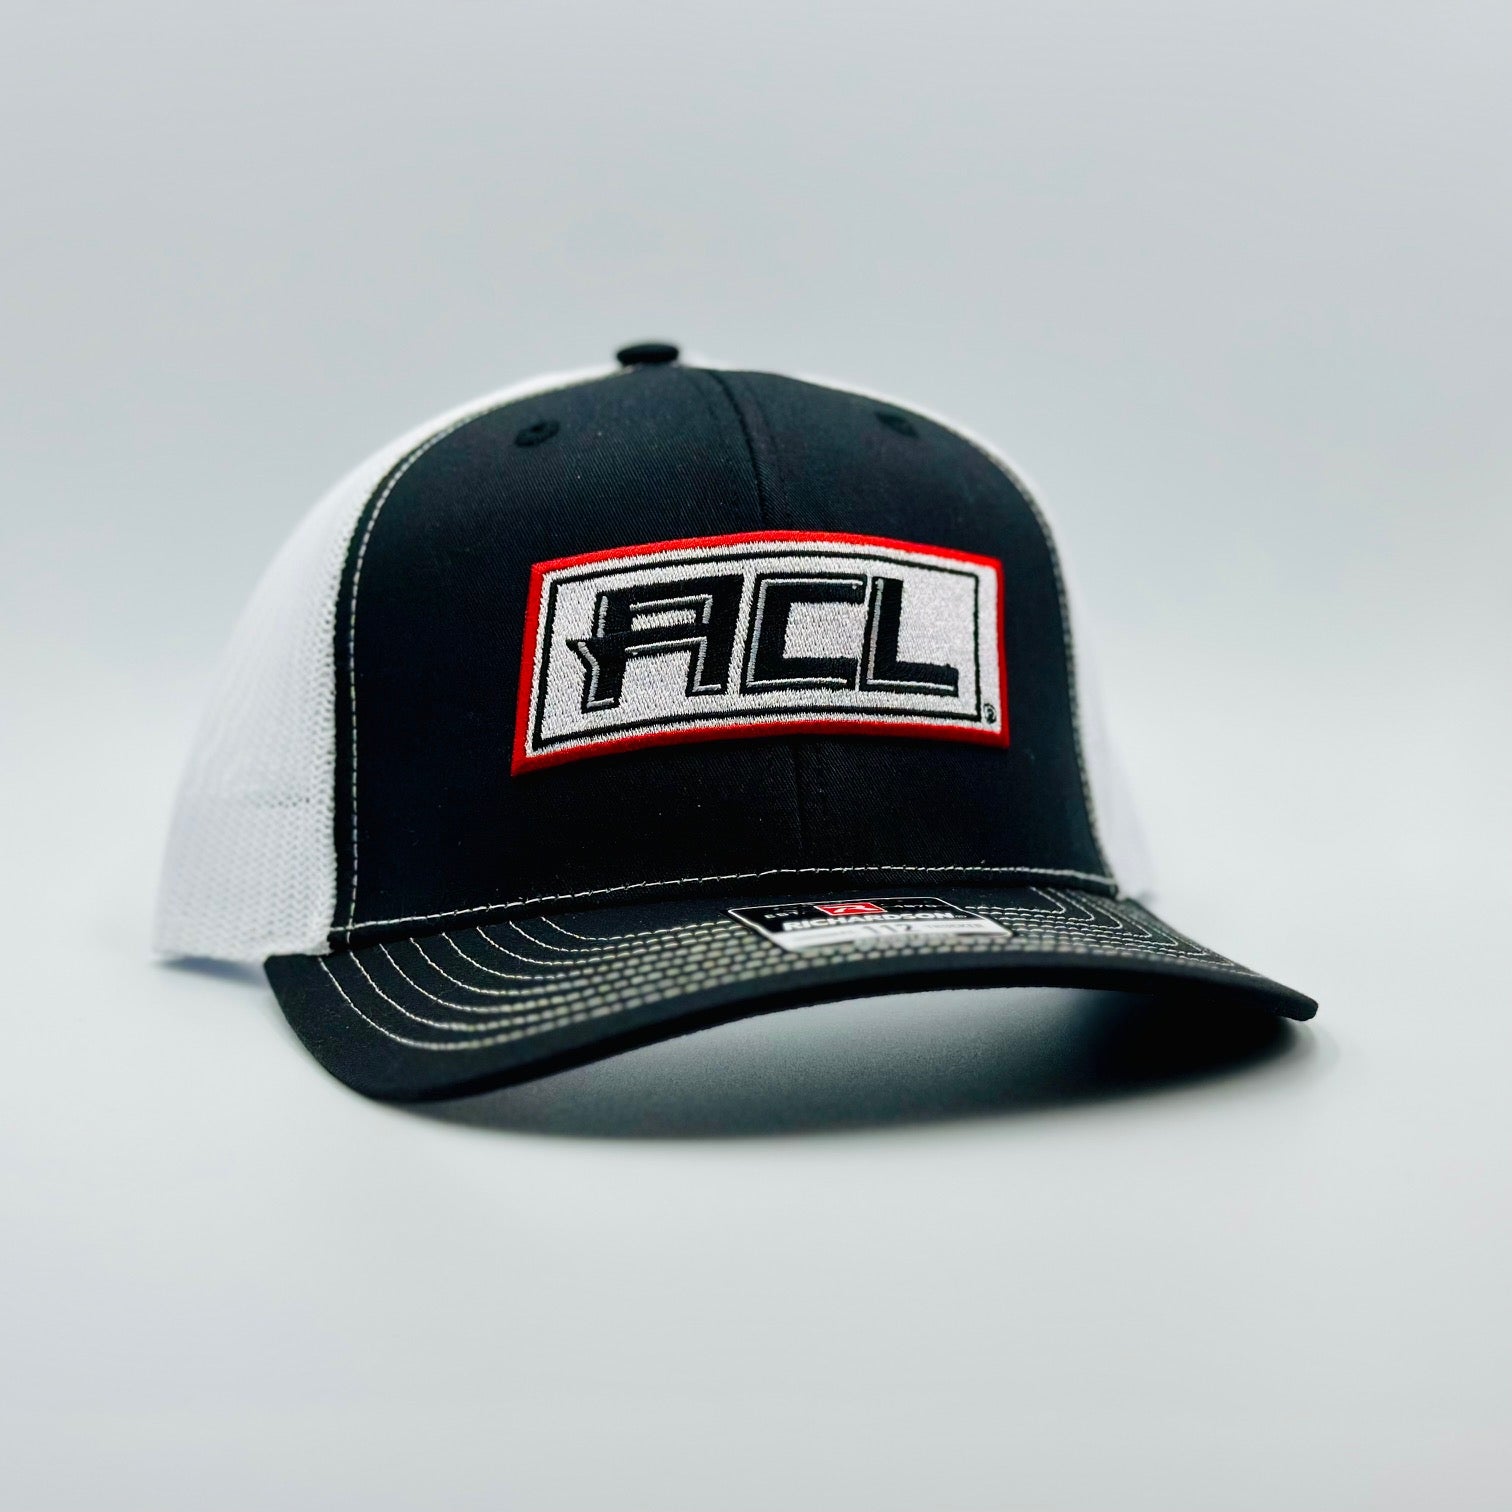 Black/White Hat With Stitched Patch